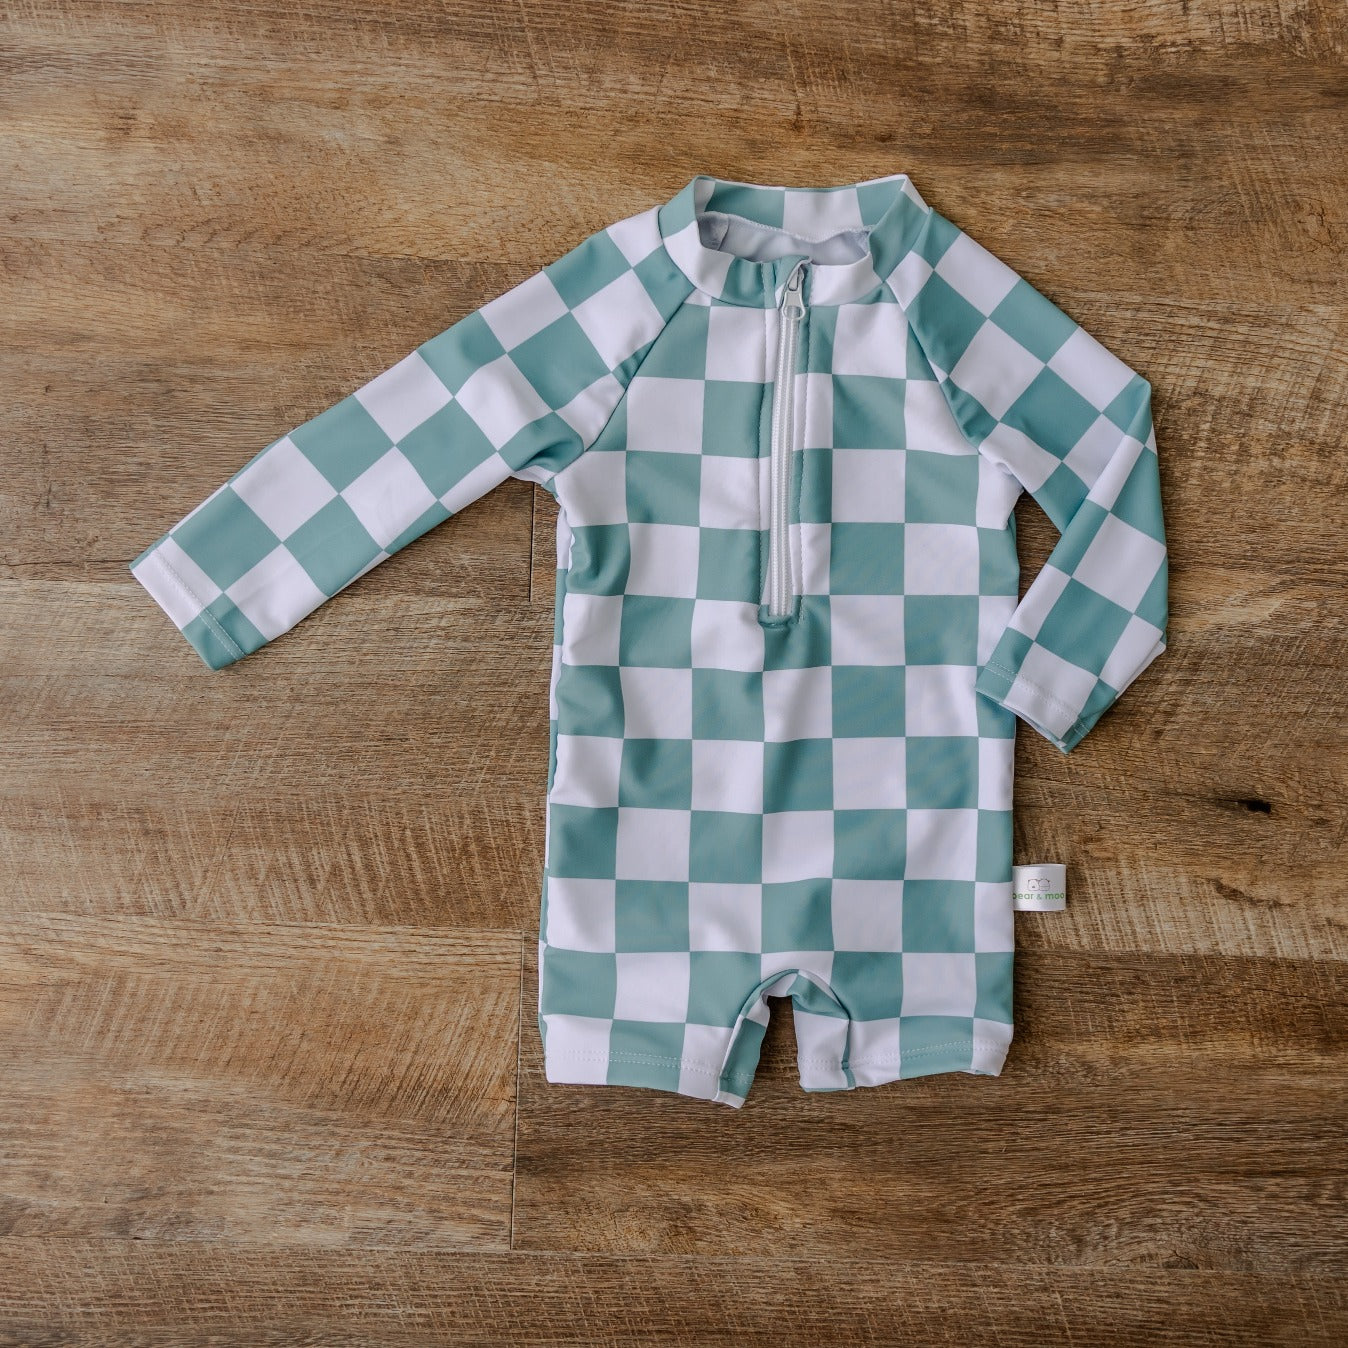 Bear & Moo Swimsuits | Emerson in Checkerboard | available at Bear & Moo